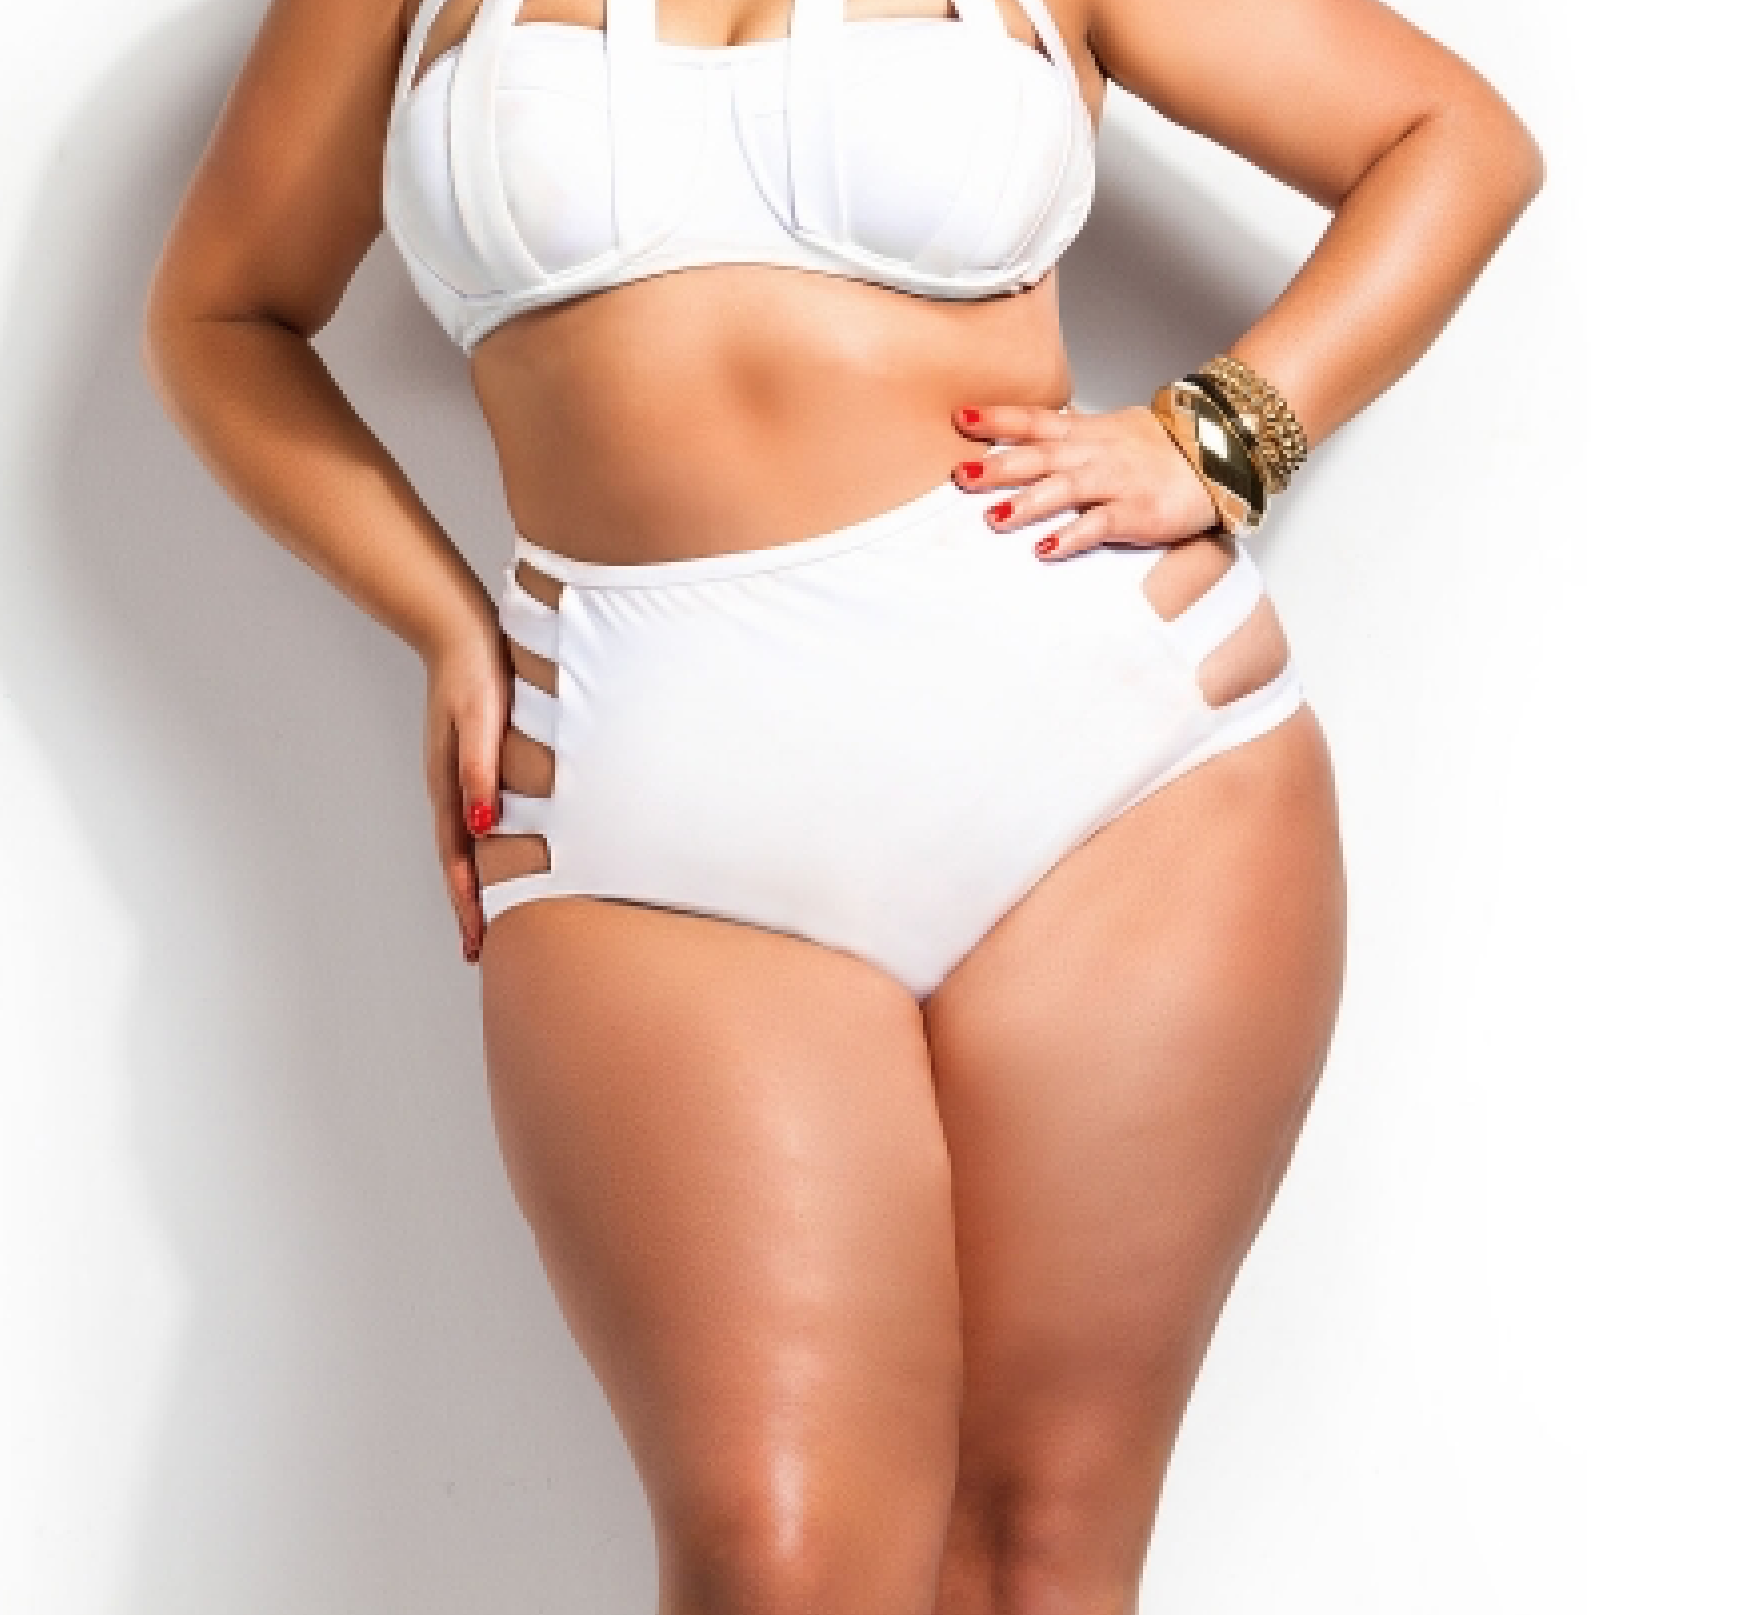 Png Fat Lady - Curvy Fat Woman Bikini Model Cellulite Photoshop Photoshopped Skin Smooth, Transparent background PNG HD thumbnail